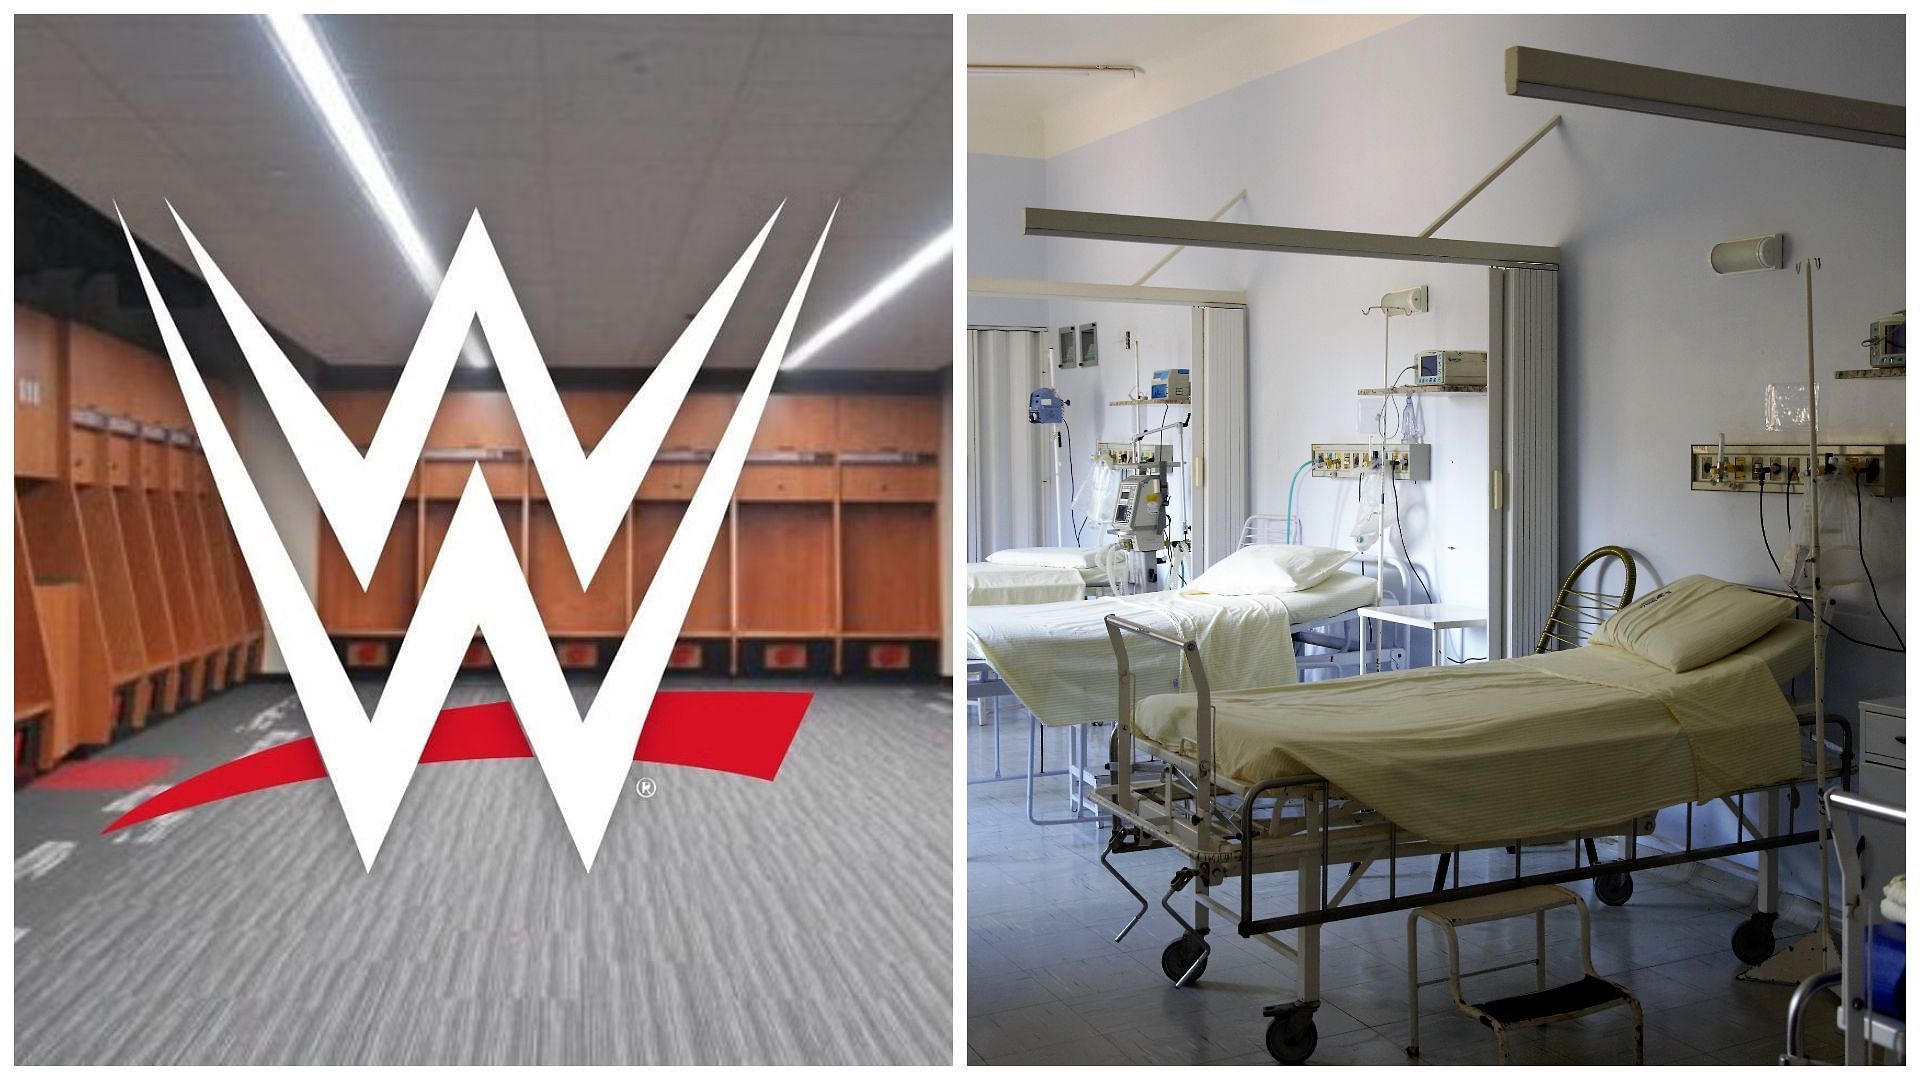 A WWE Superstar may be seriously injured.